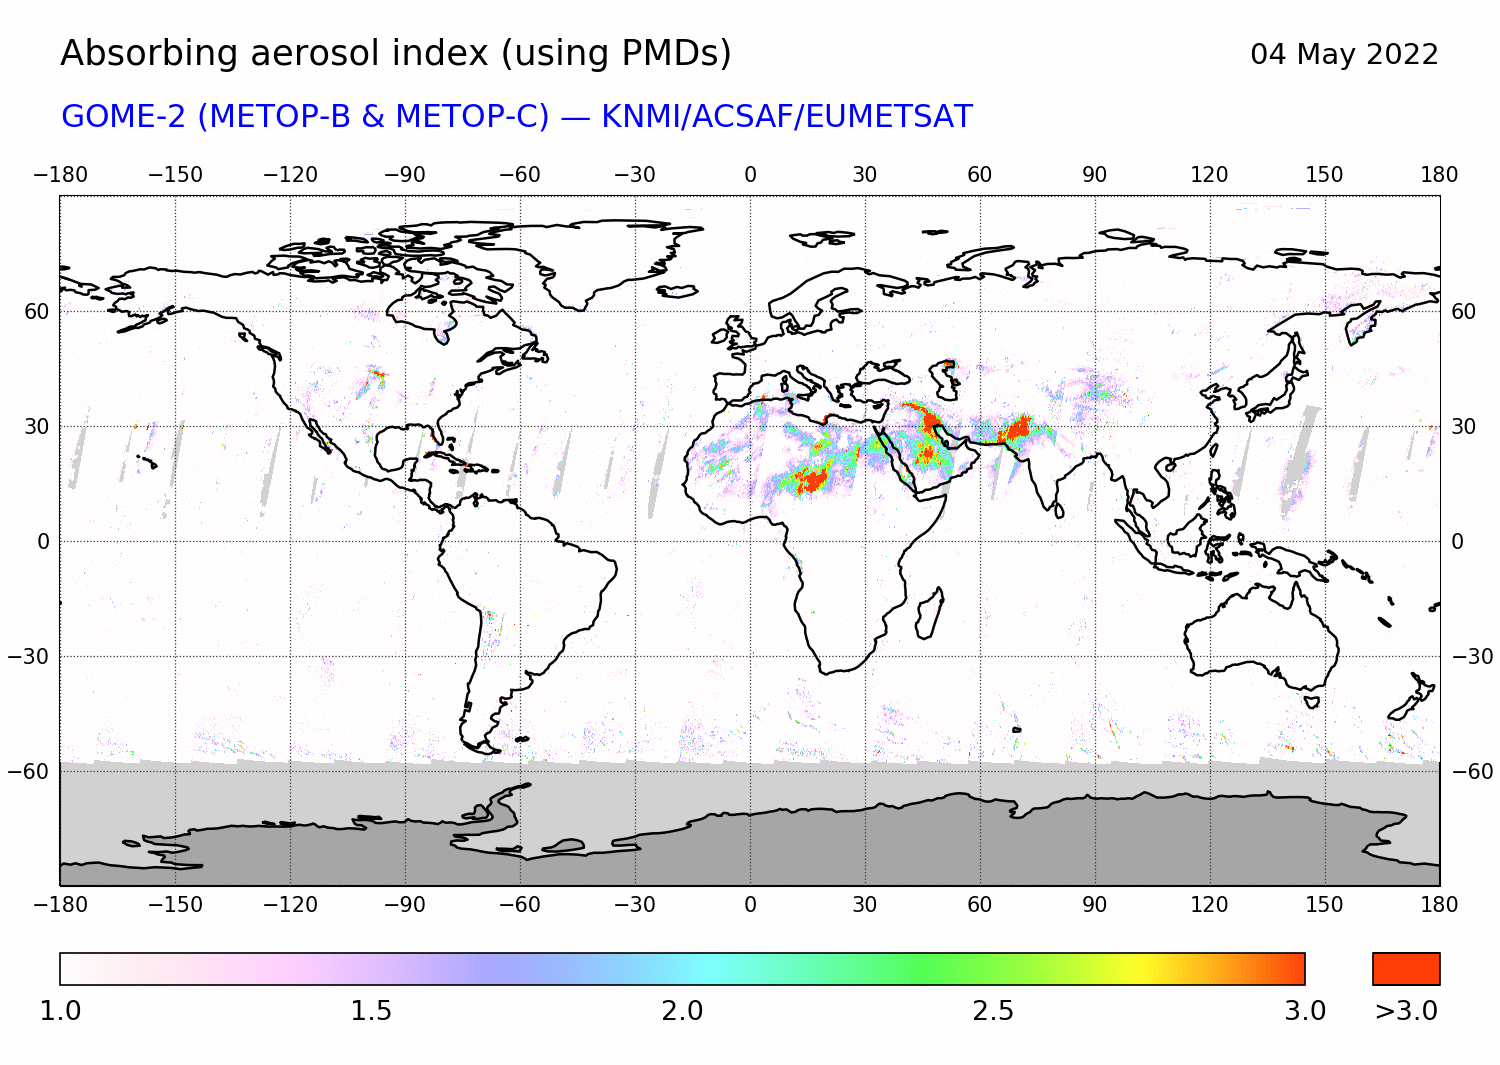 GOME-2 - Absorbing aerosol index of 04 May 2022